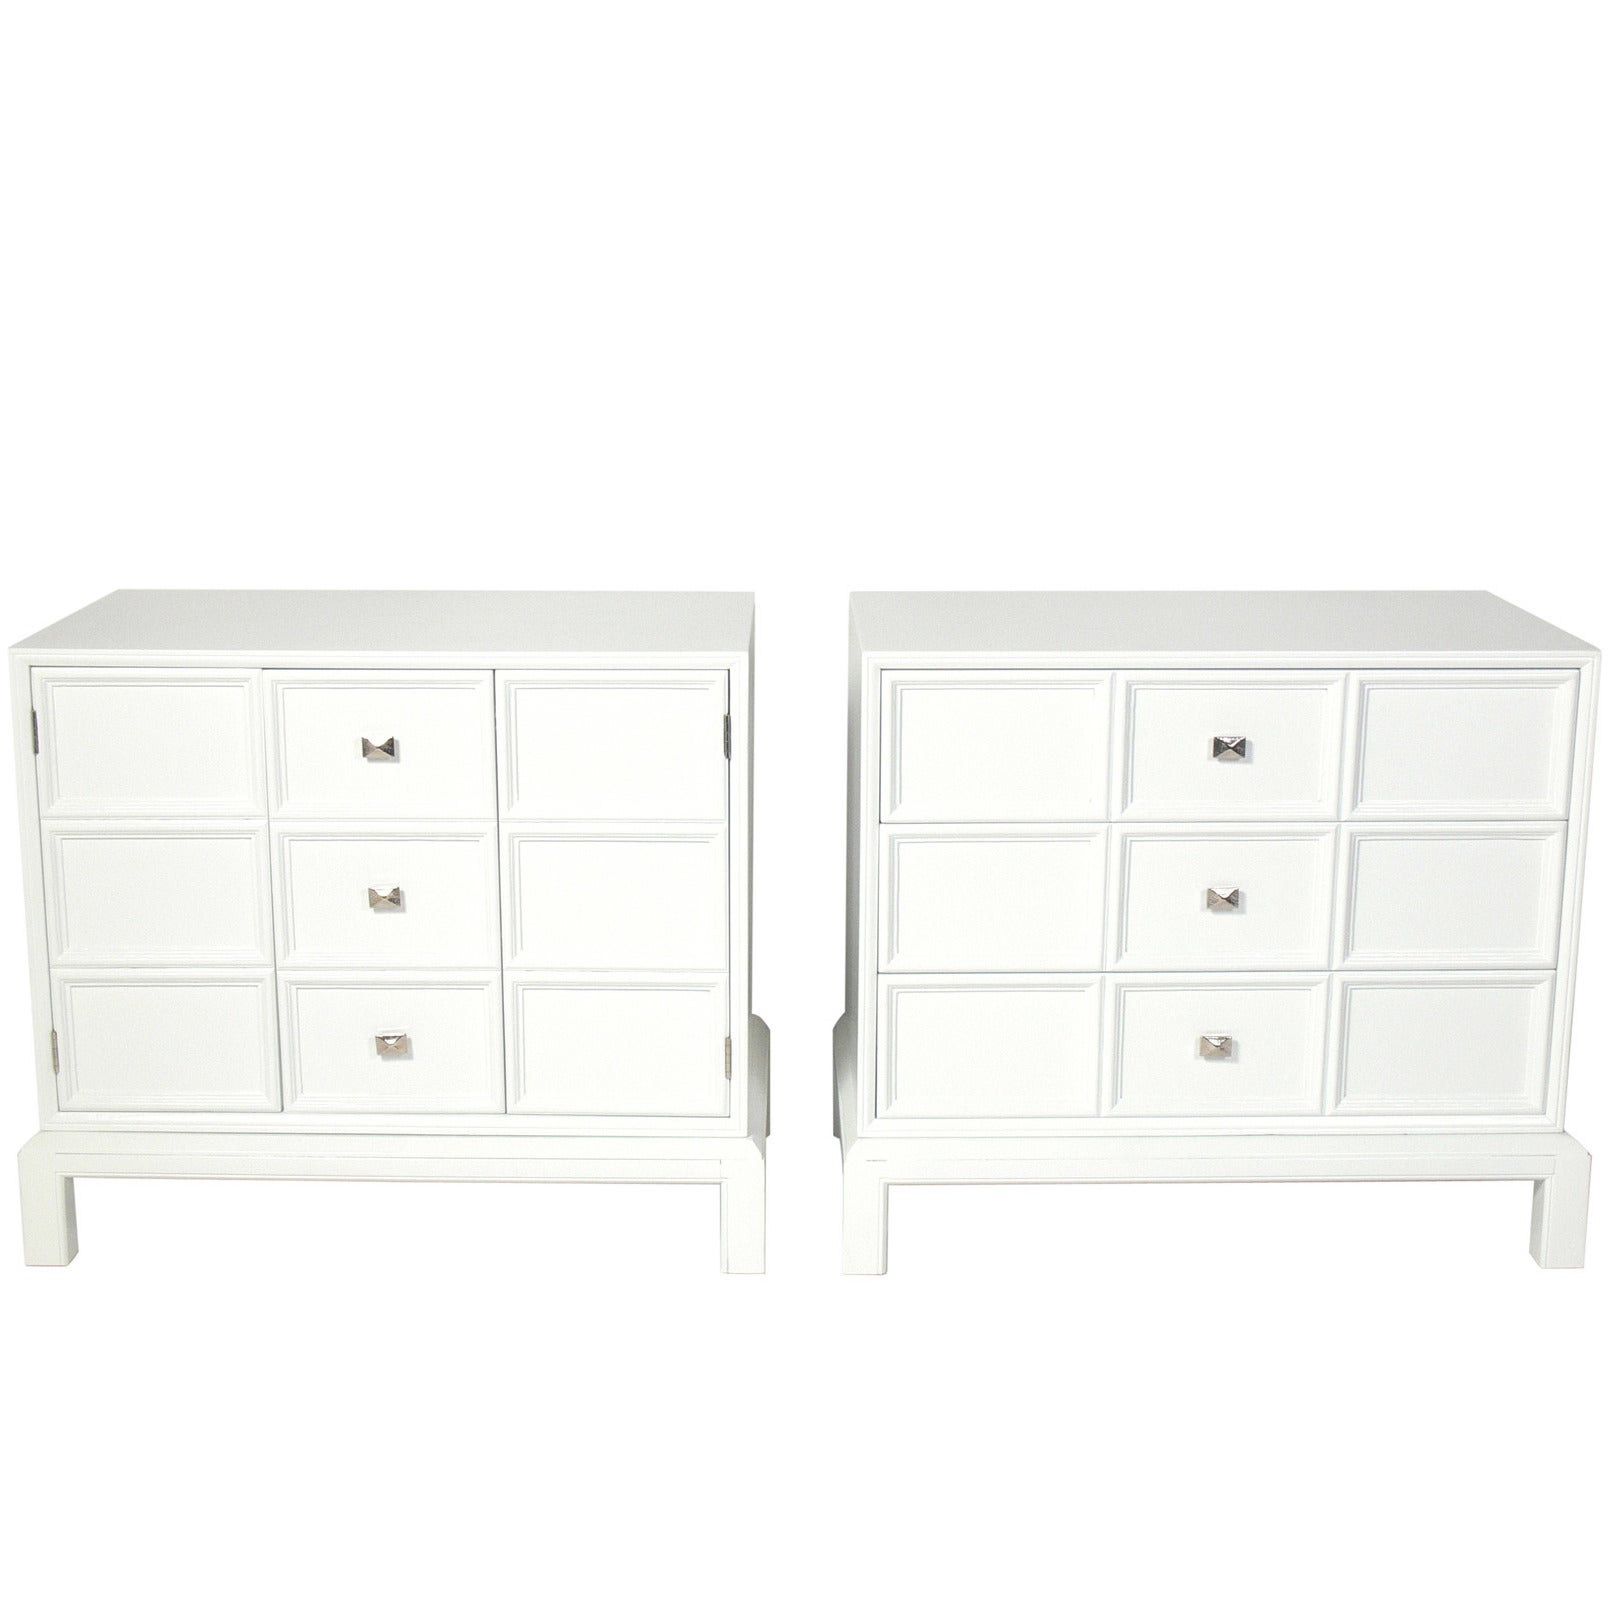 Pair of White Lacquer and Nickel Hardware Chests